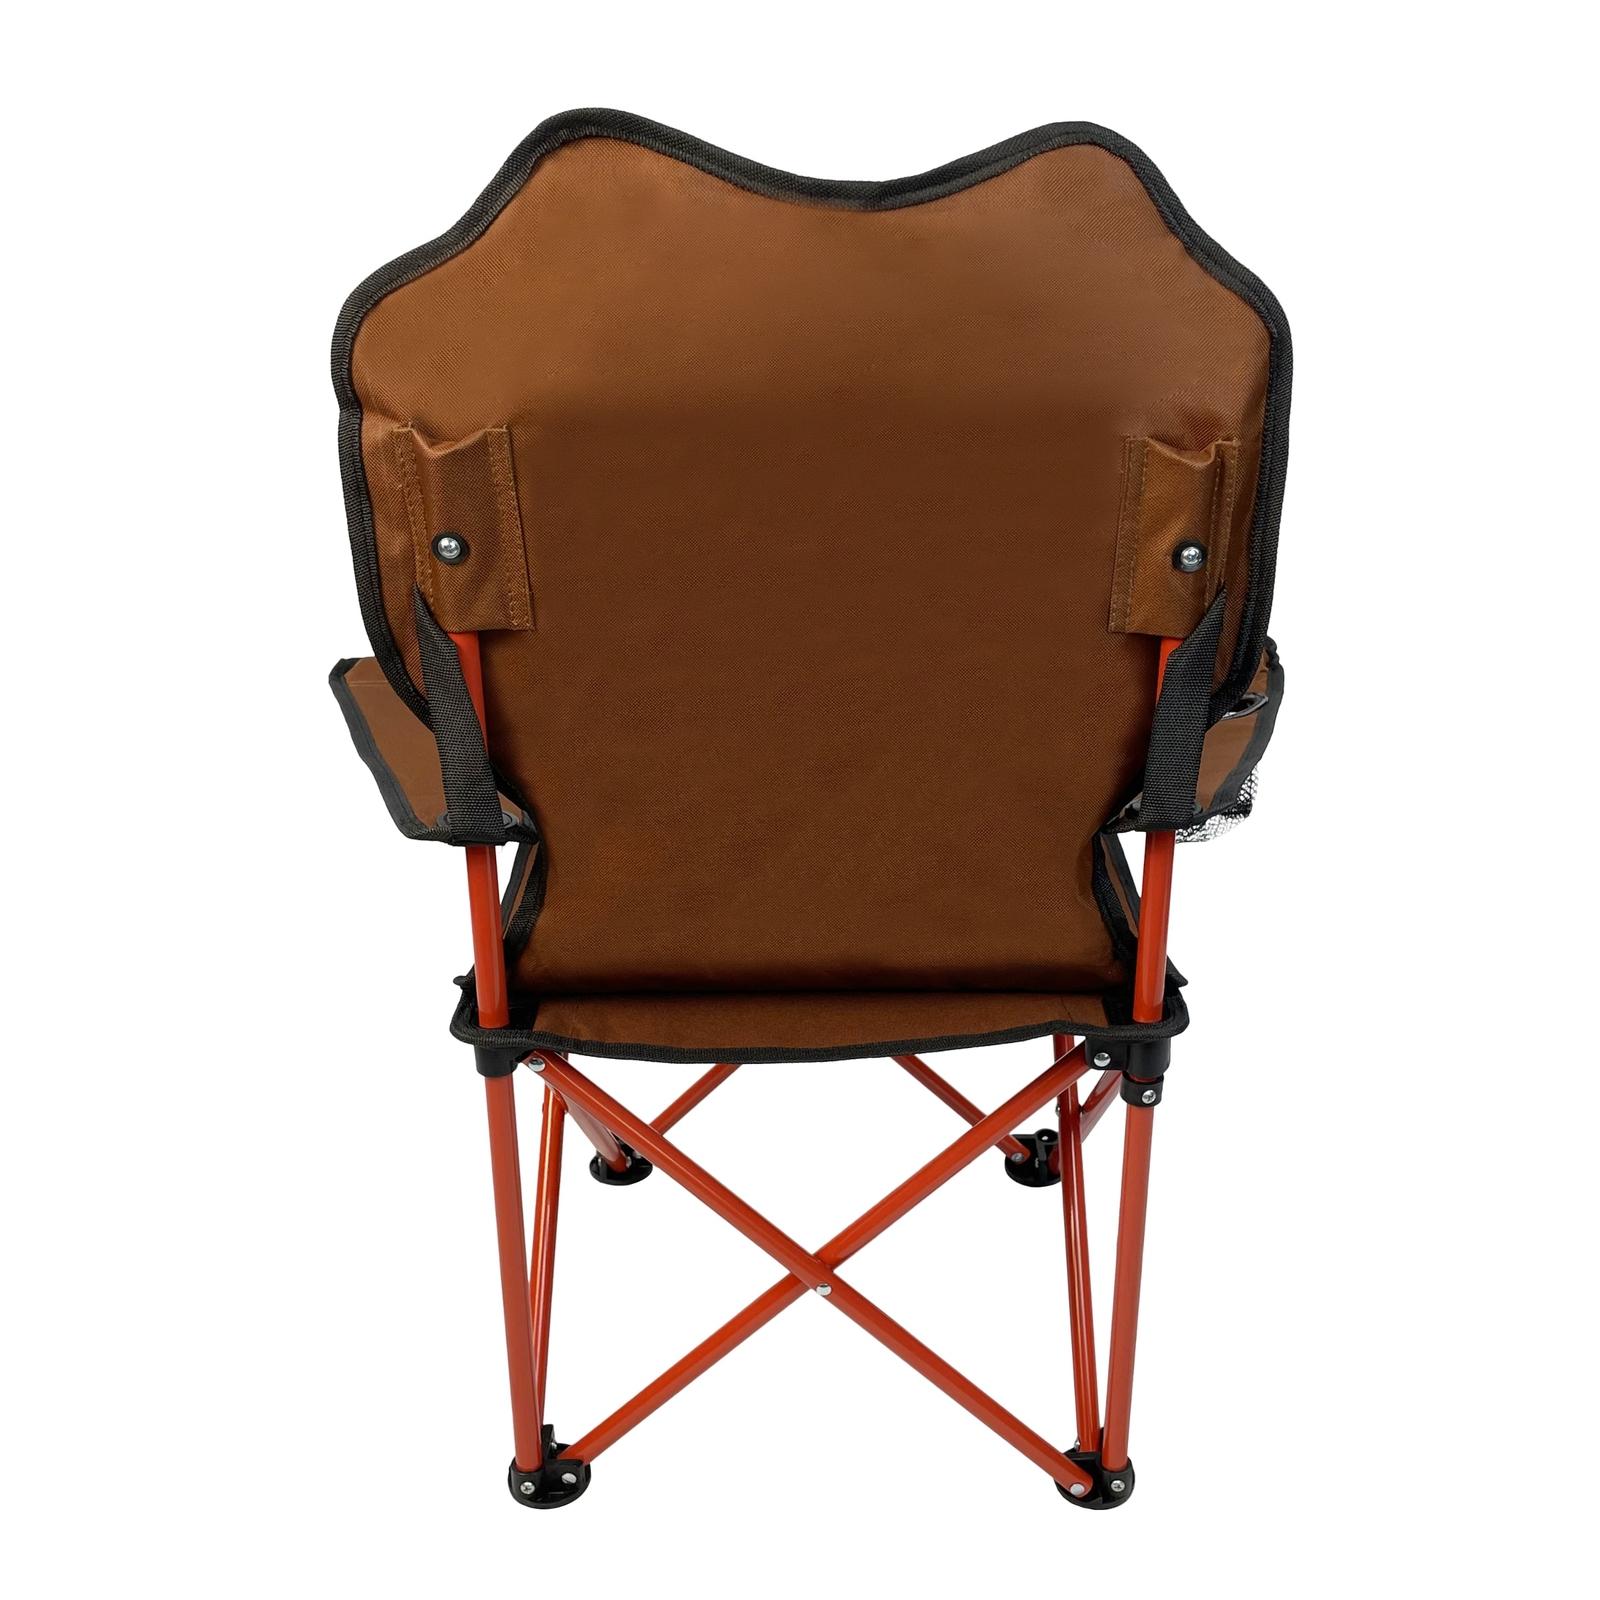 Outdoor Revival Youth Cow Chair